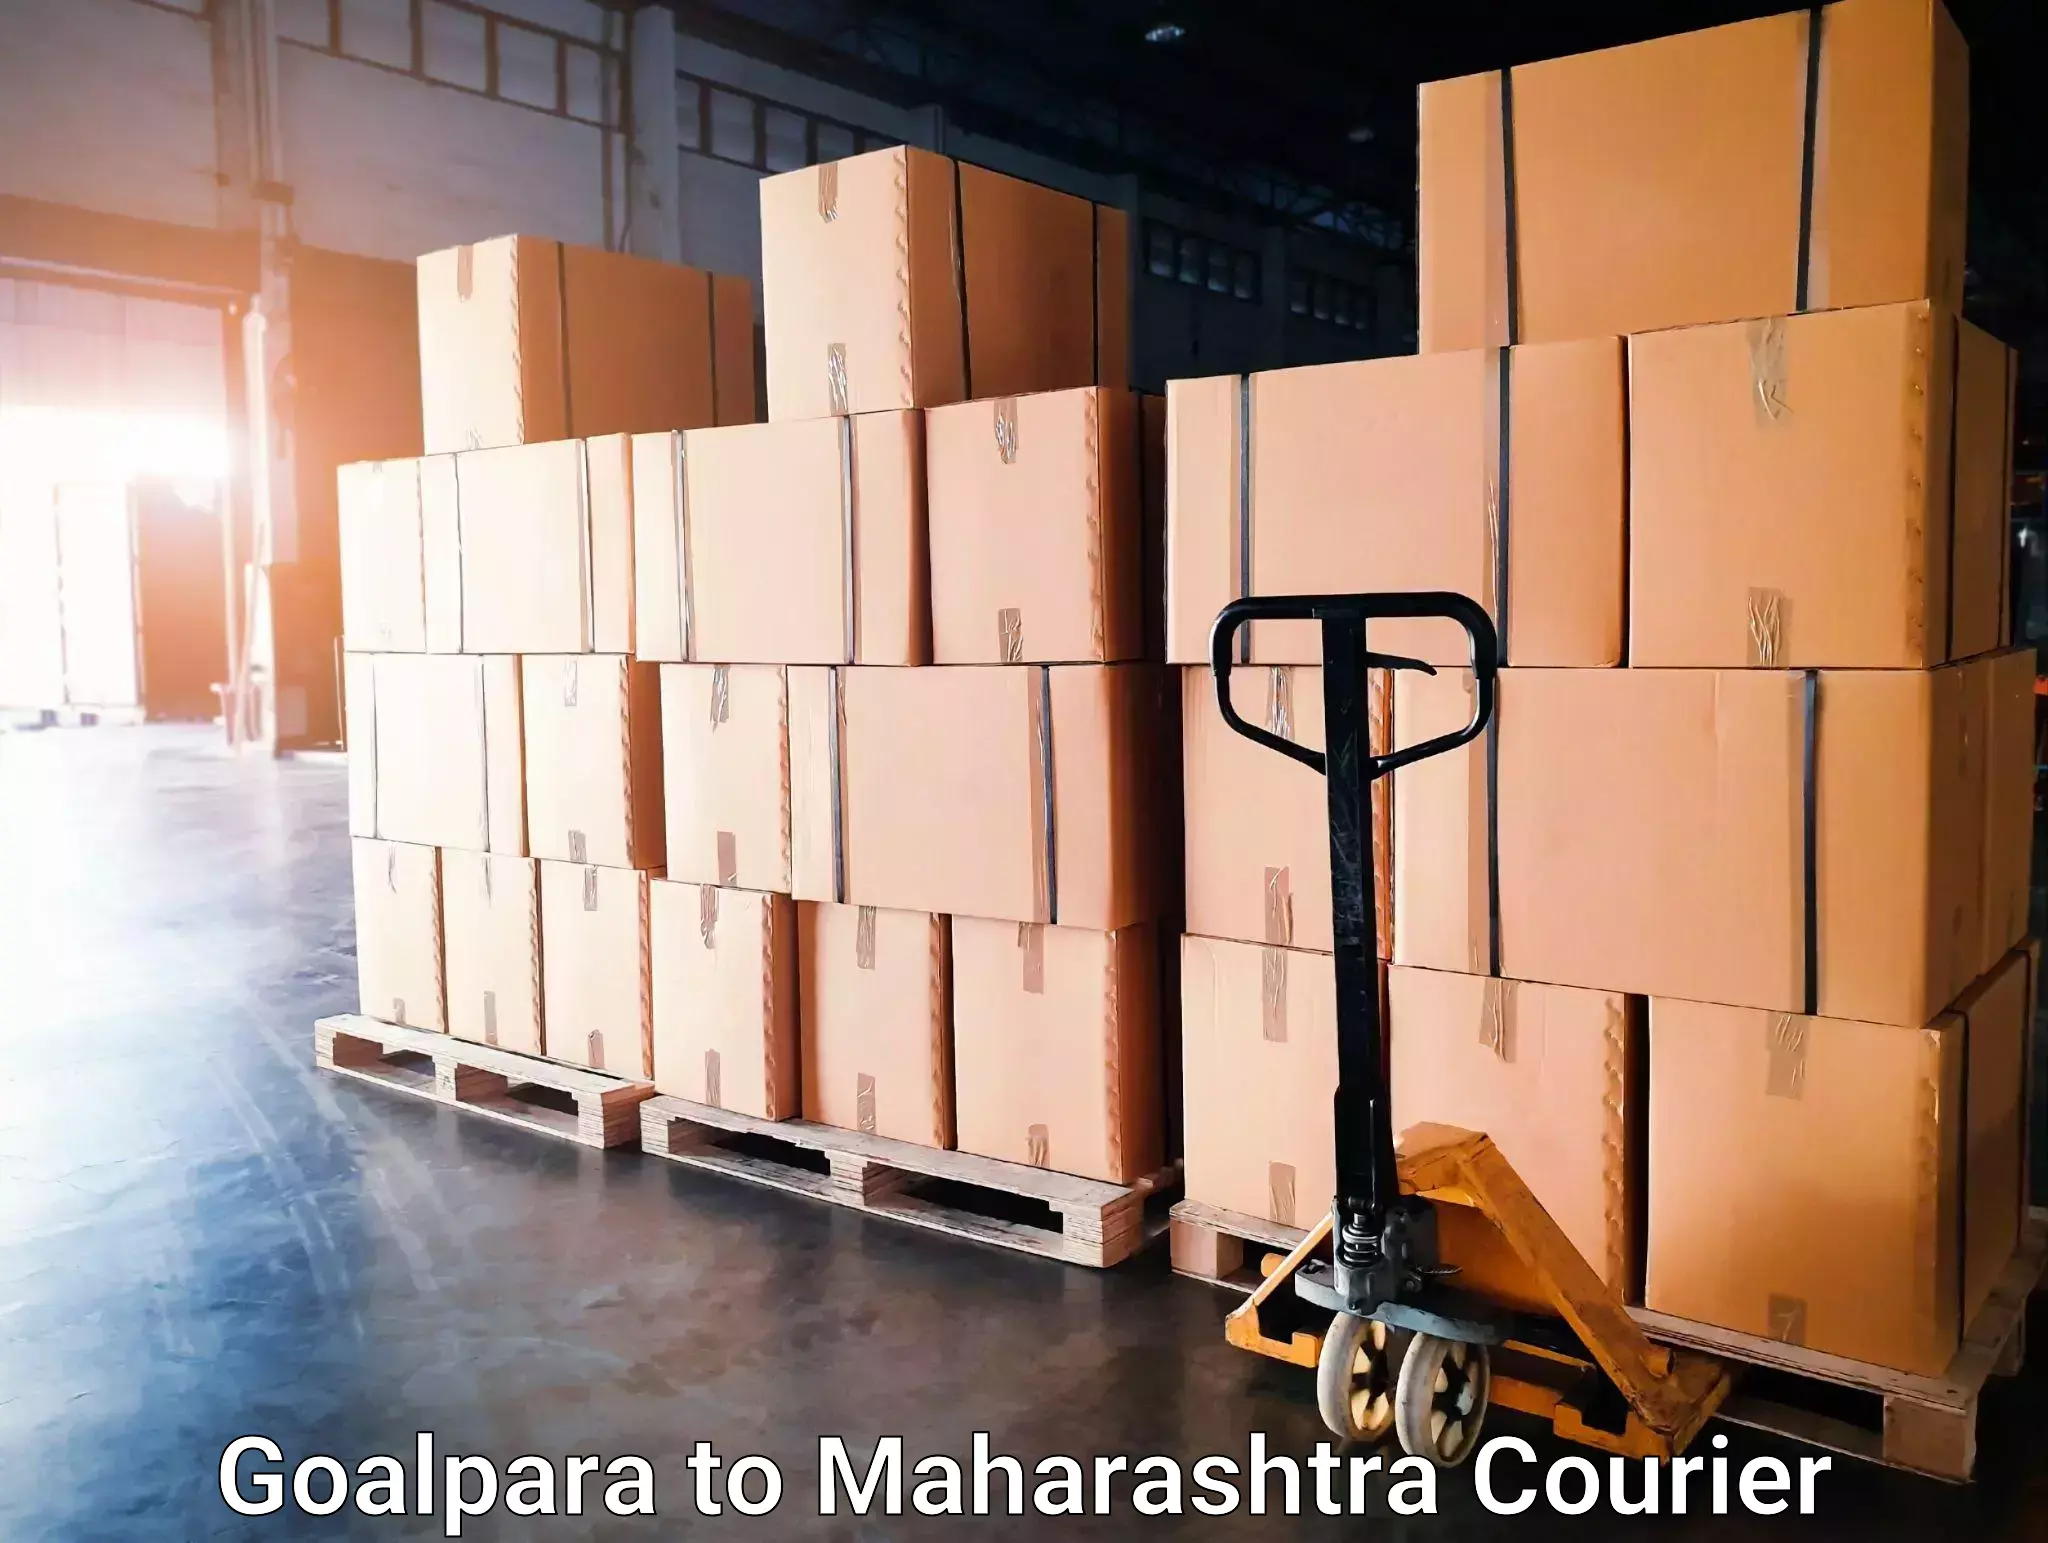 State-of-the-art courier technology Goalpara to Pandharkawada